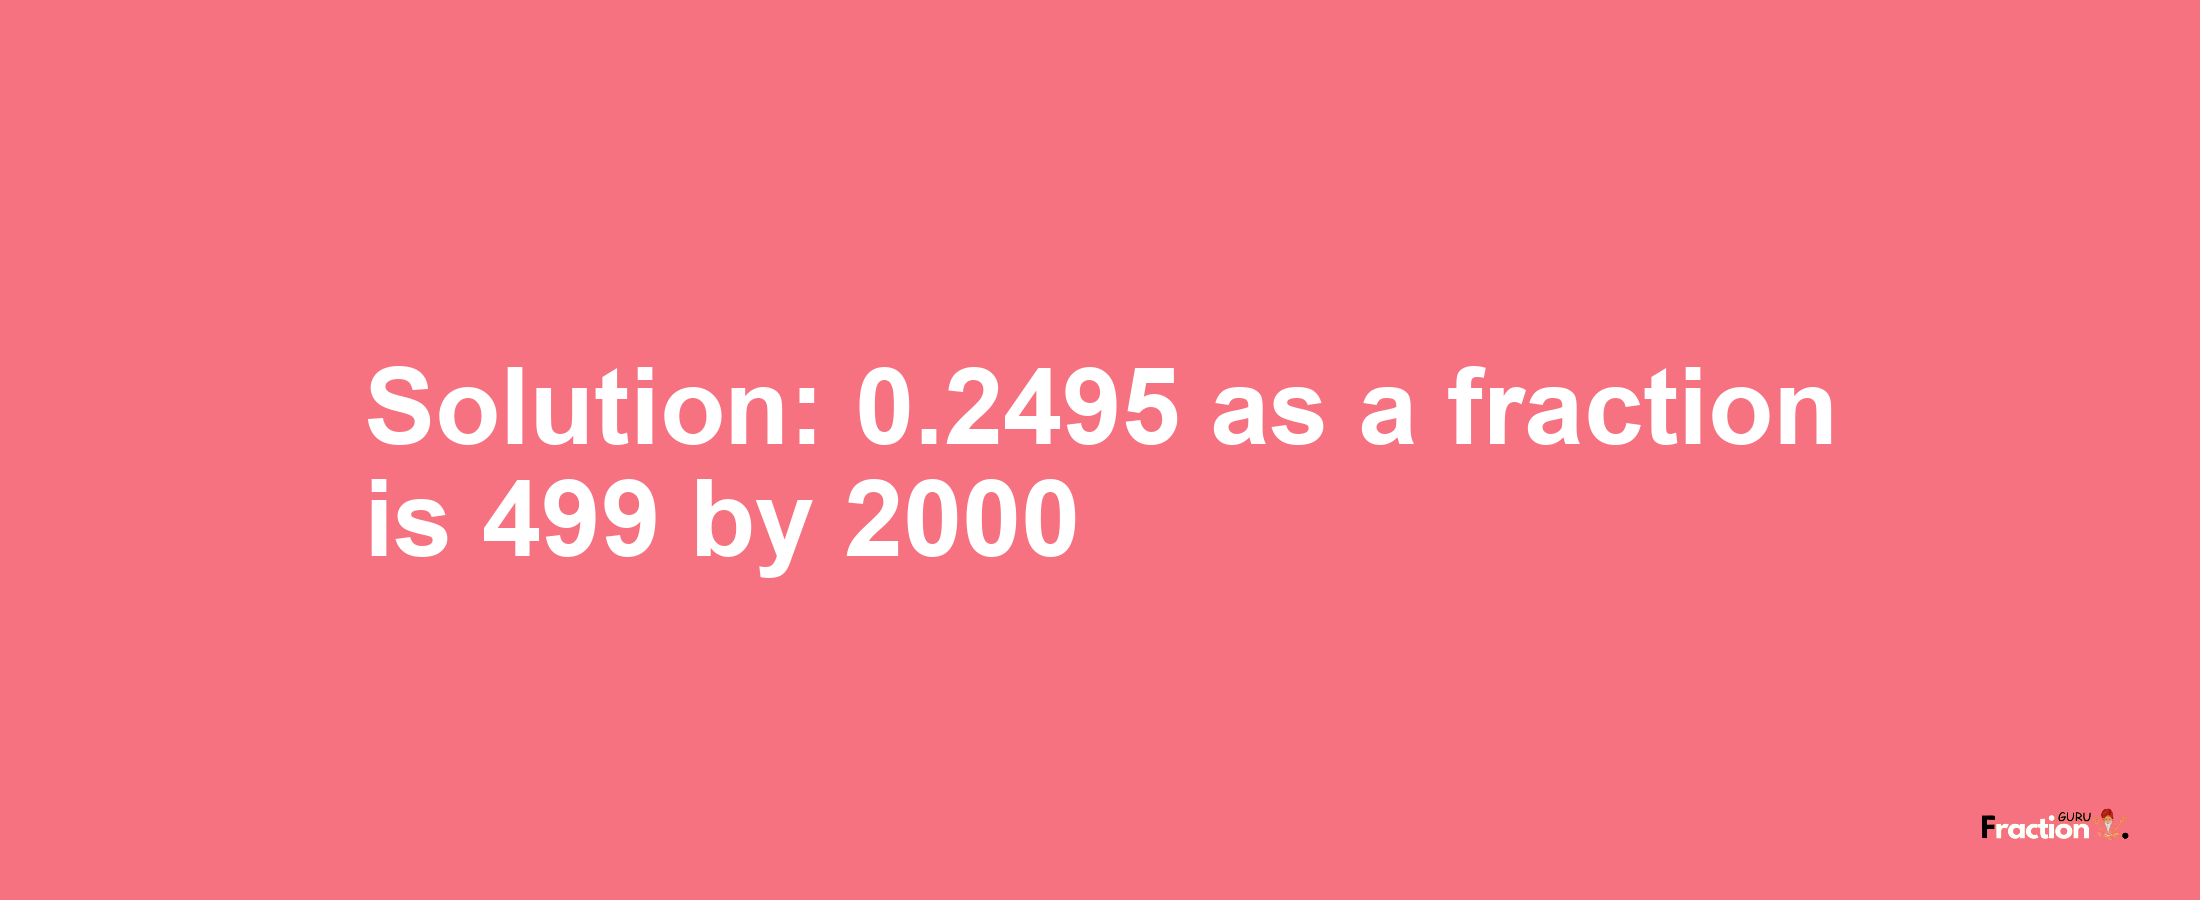 Solution:0.2495 as a fraction is 499/2000